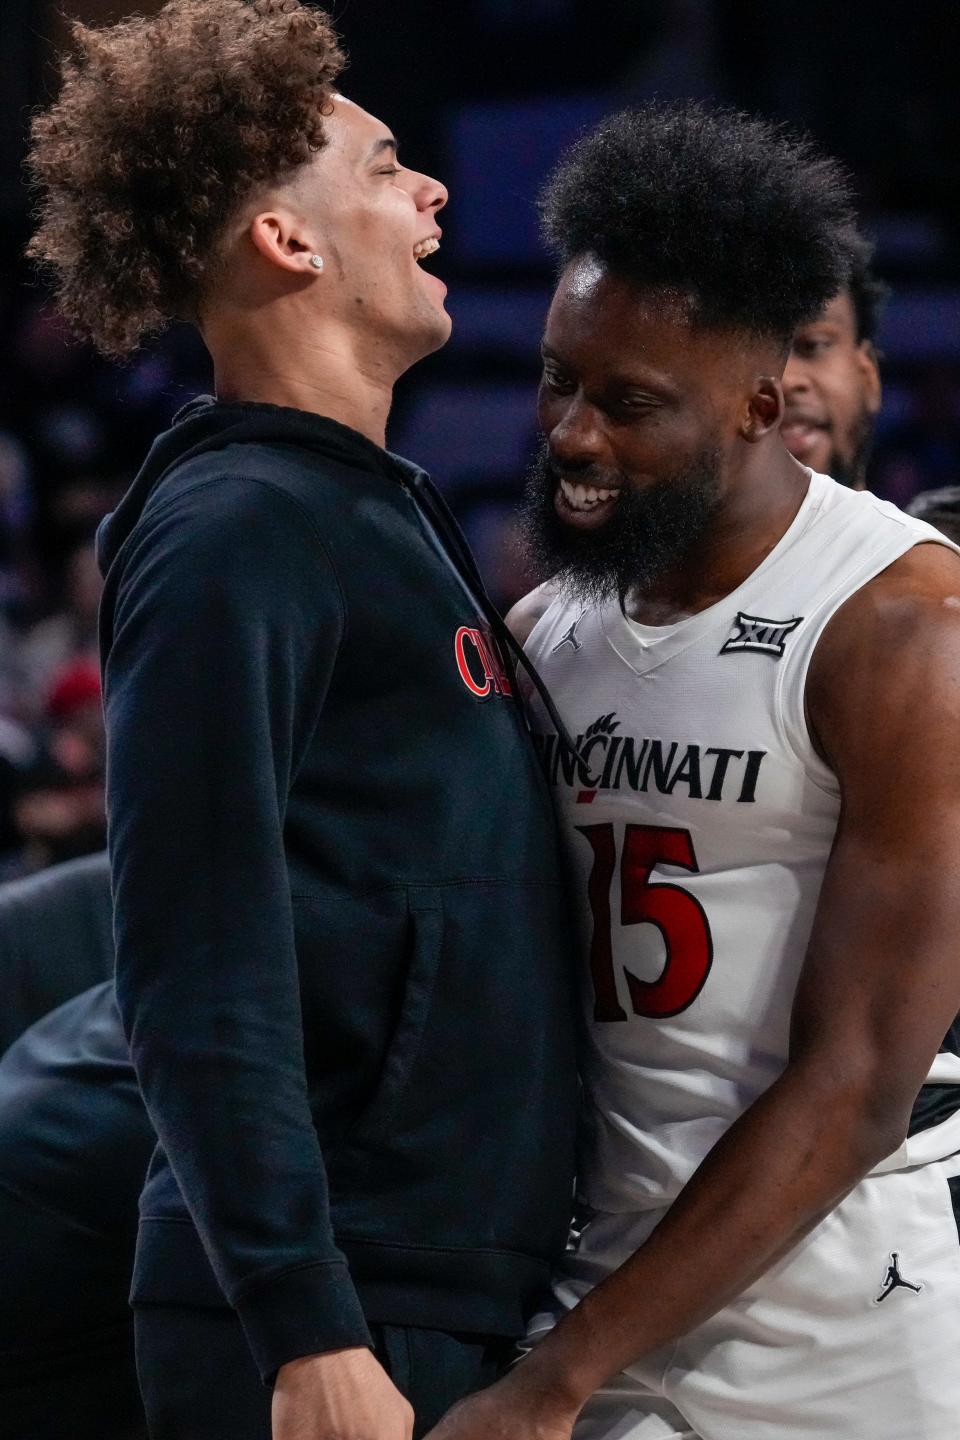 Cincinnati Bearcats guard Dan Skillings Jr. (0) chest bumps forward John Newman III (15) during UC's 74-72 victory over Kansas State Saturday night. Skillings was unavailable to play with a hip issue.